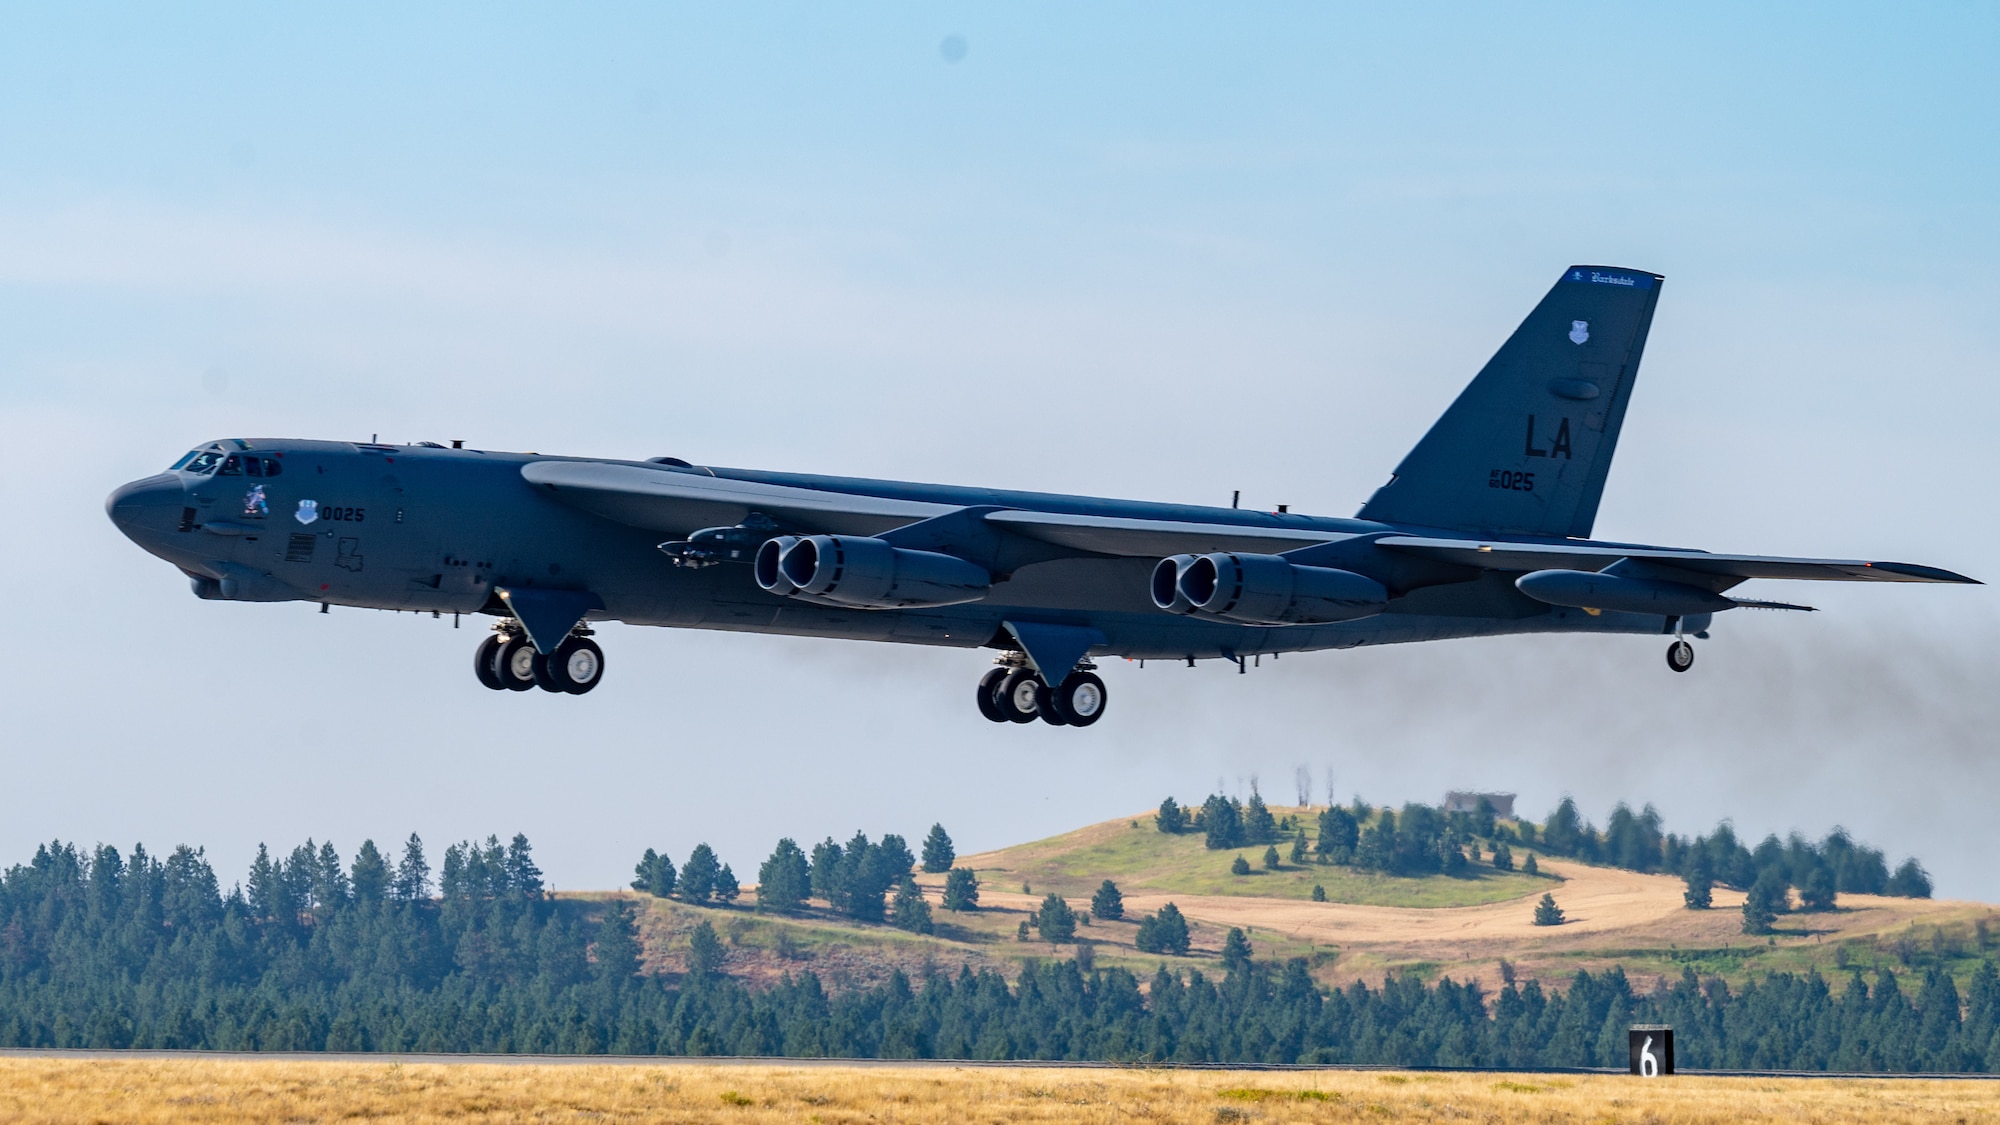 A B-52H Stratofortress takes off from Fairchild Air Force Base, Washington during an Agile Combat Employment exercise Aug. 18, 2022. When using the ACE concept the B-52s can land at a non-bomber location, receive repairs, resupply and be back in the air within a few hours. (U.S. Air Force photo by Senior Airman Chase Sullivan)